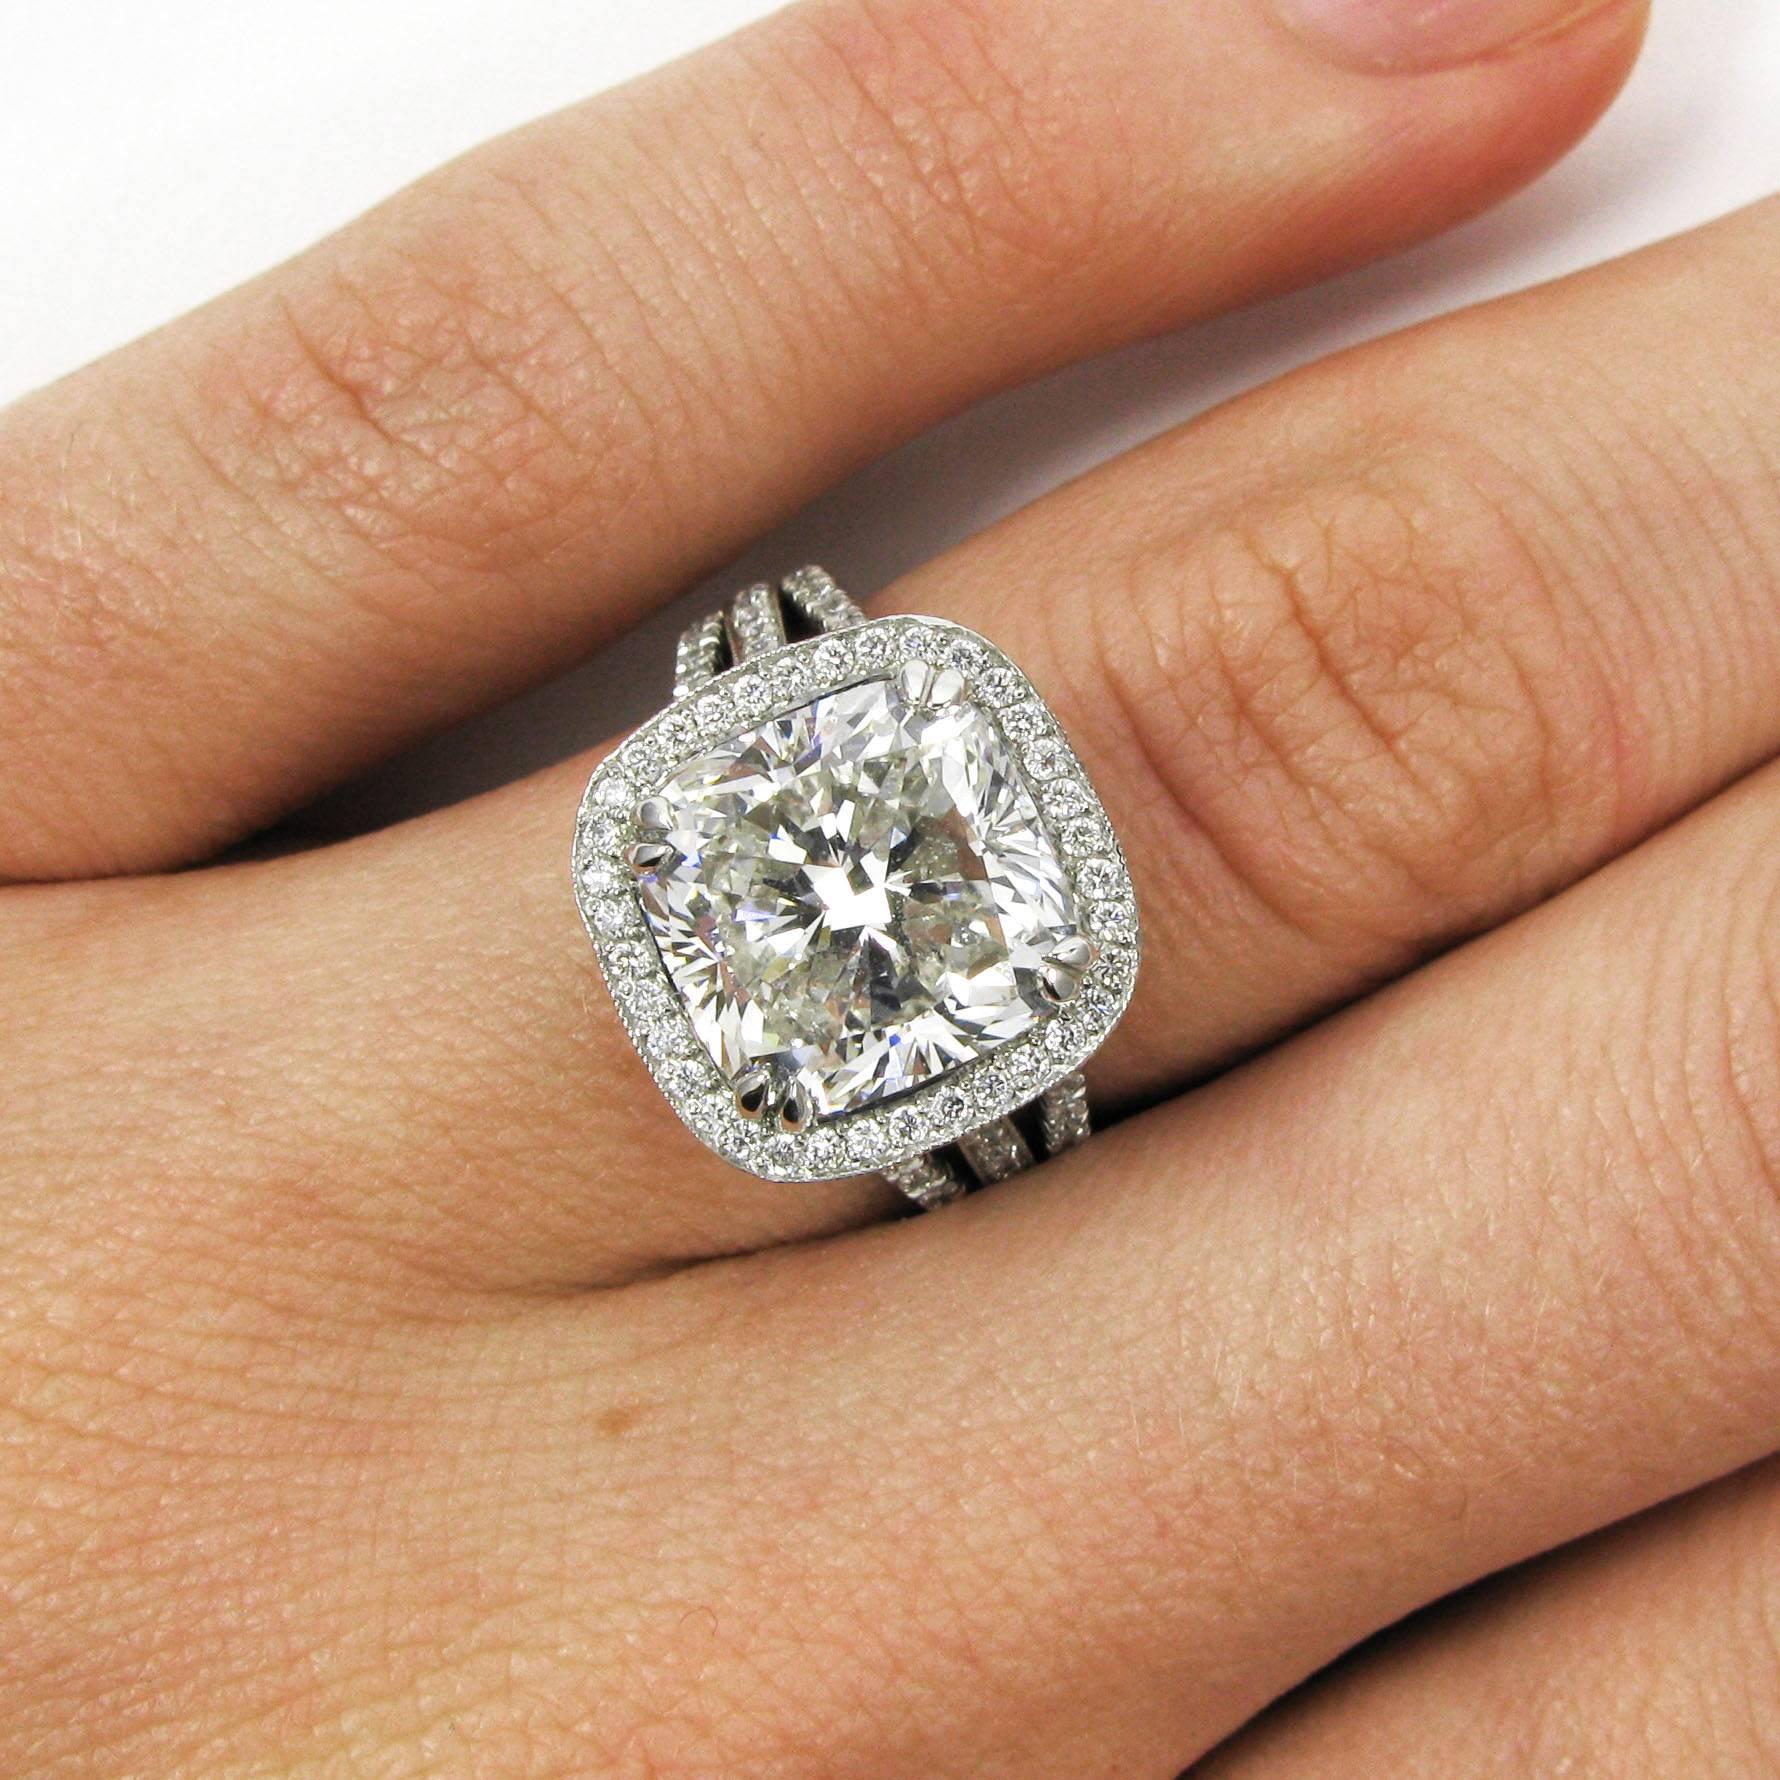 This intricate and stylish design is sure to make an impact! A lovely 6.19 carat cushion-cut diamond with J color and SI1 clarity is prong-set into a triple shank frame ring studded with sparkling pave diamonds. Mounted in platinum. 

Purchase